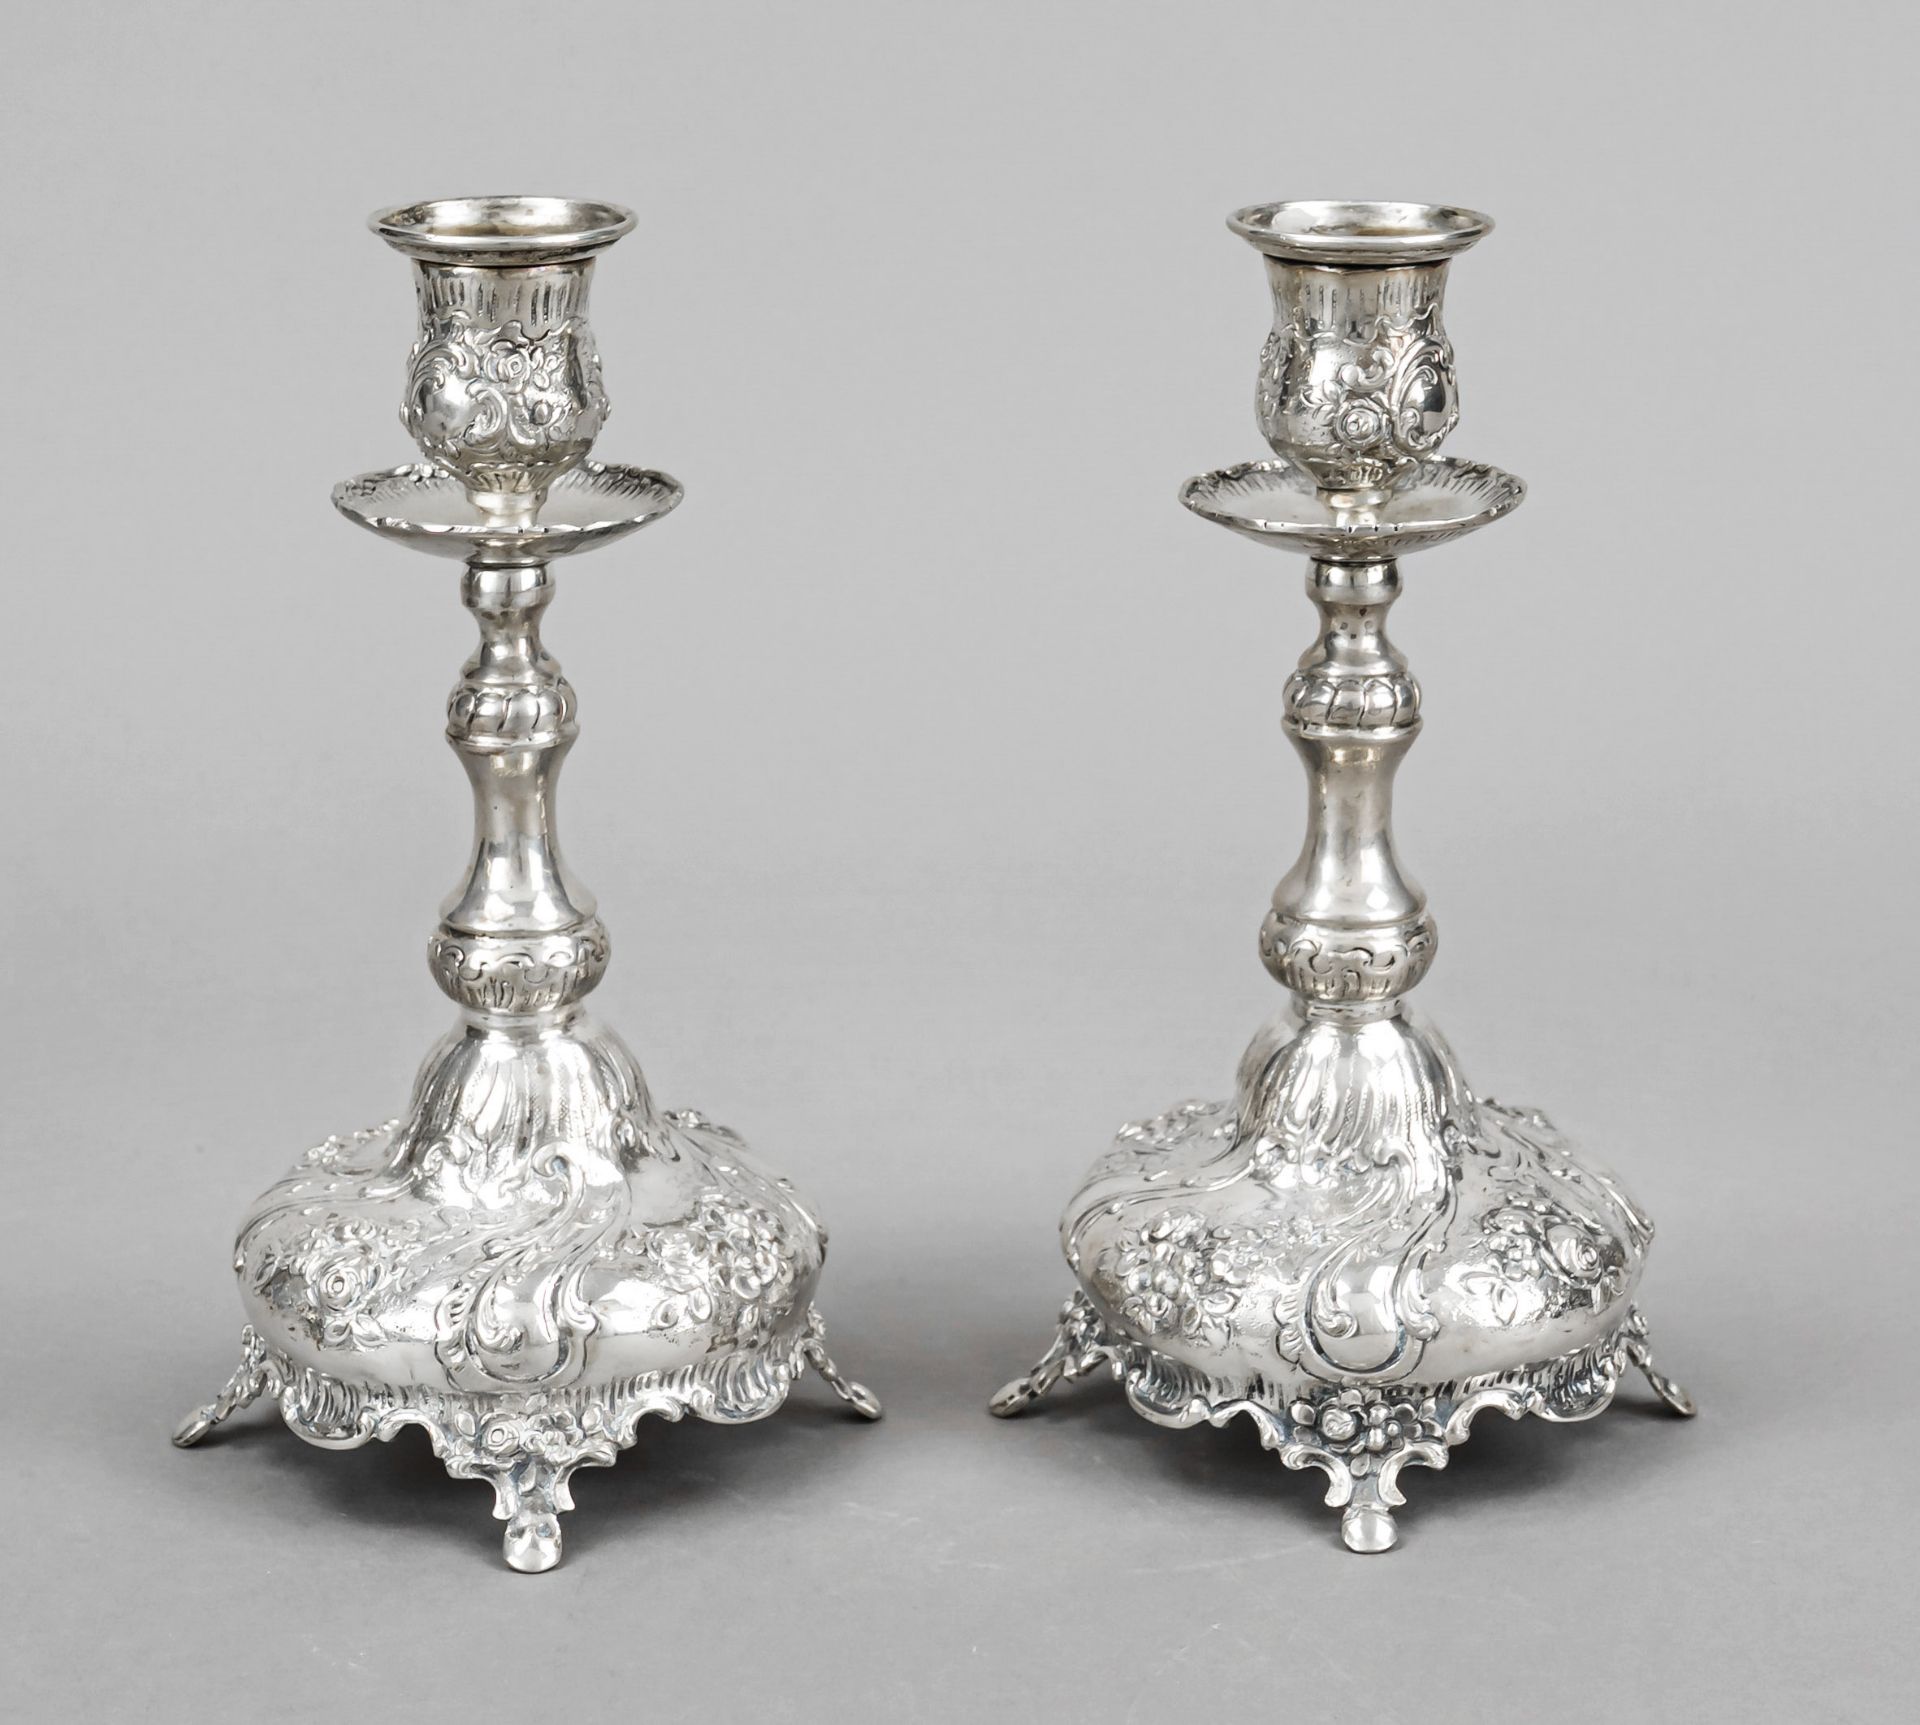 A pair of candlesticks, 20th century, silver tested, round domed stand on 4 feet, baluster shaft,